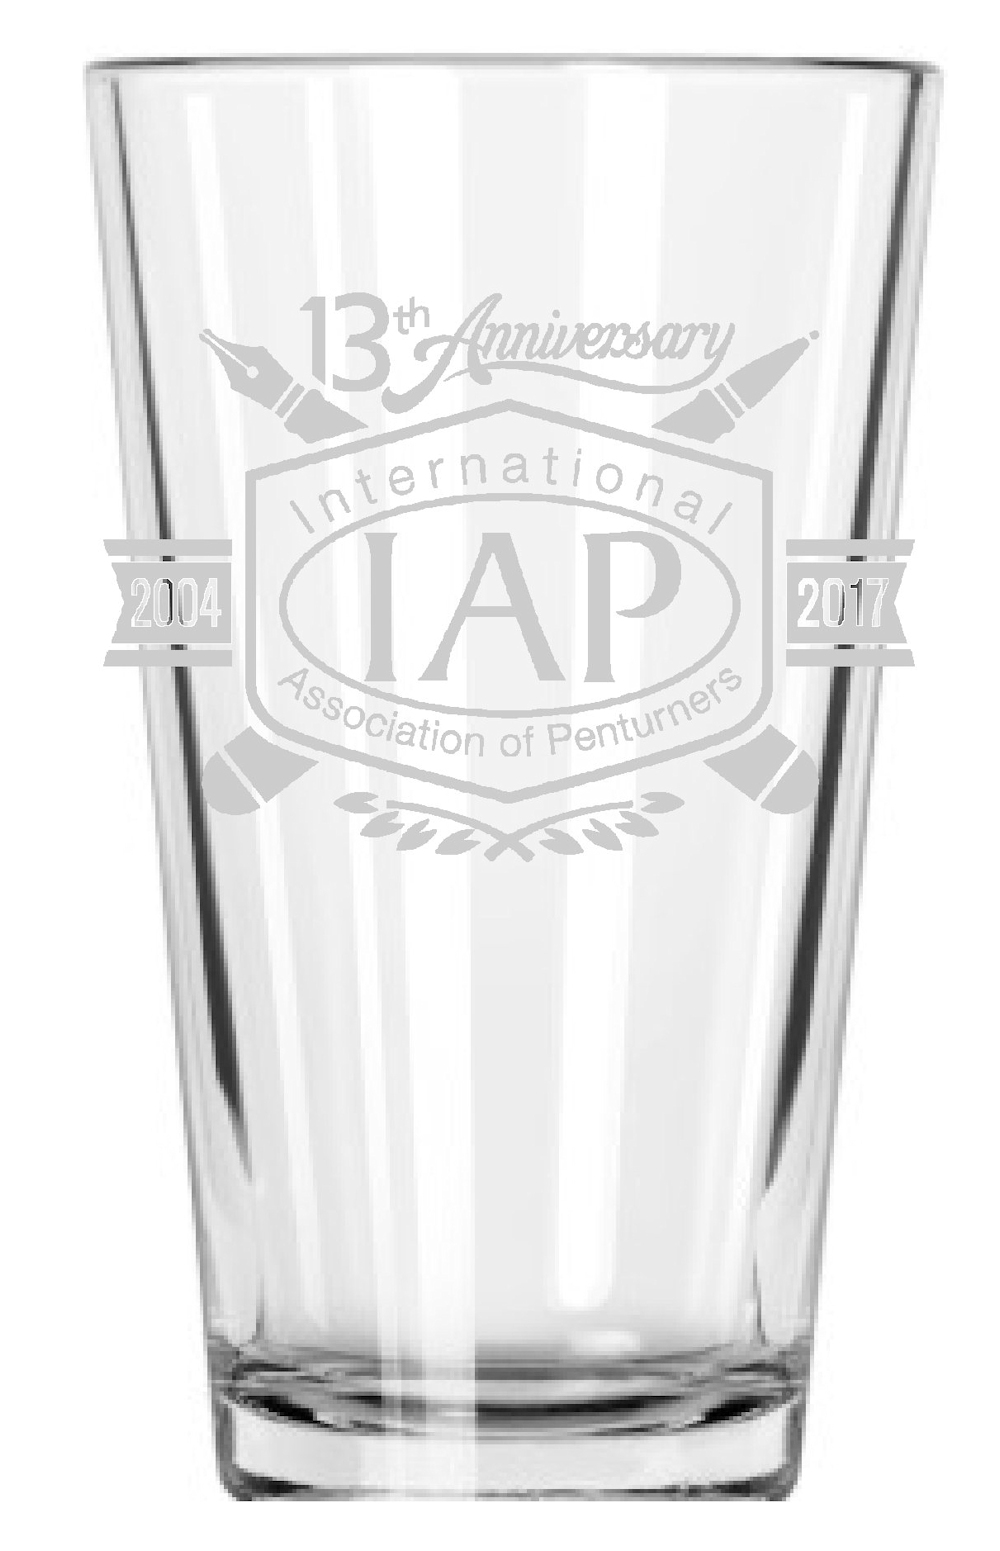 13th Anniversary Engraved Pint Glass